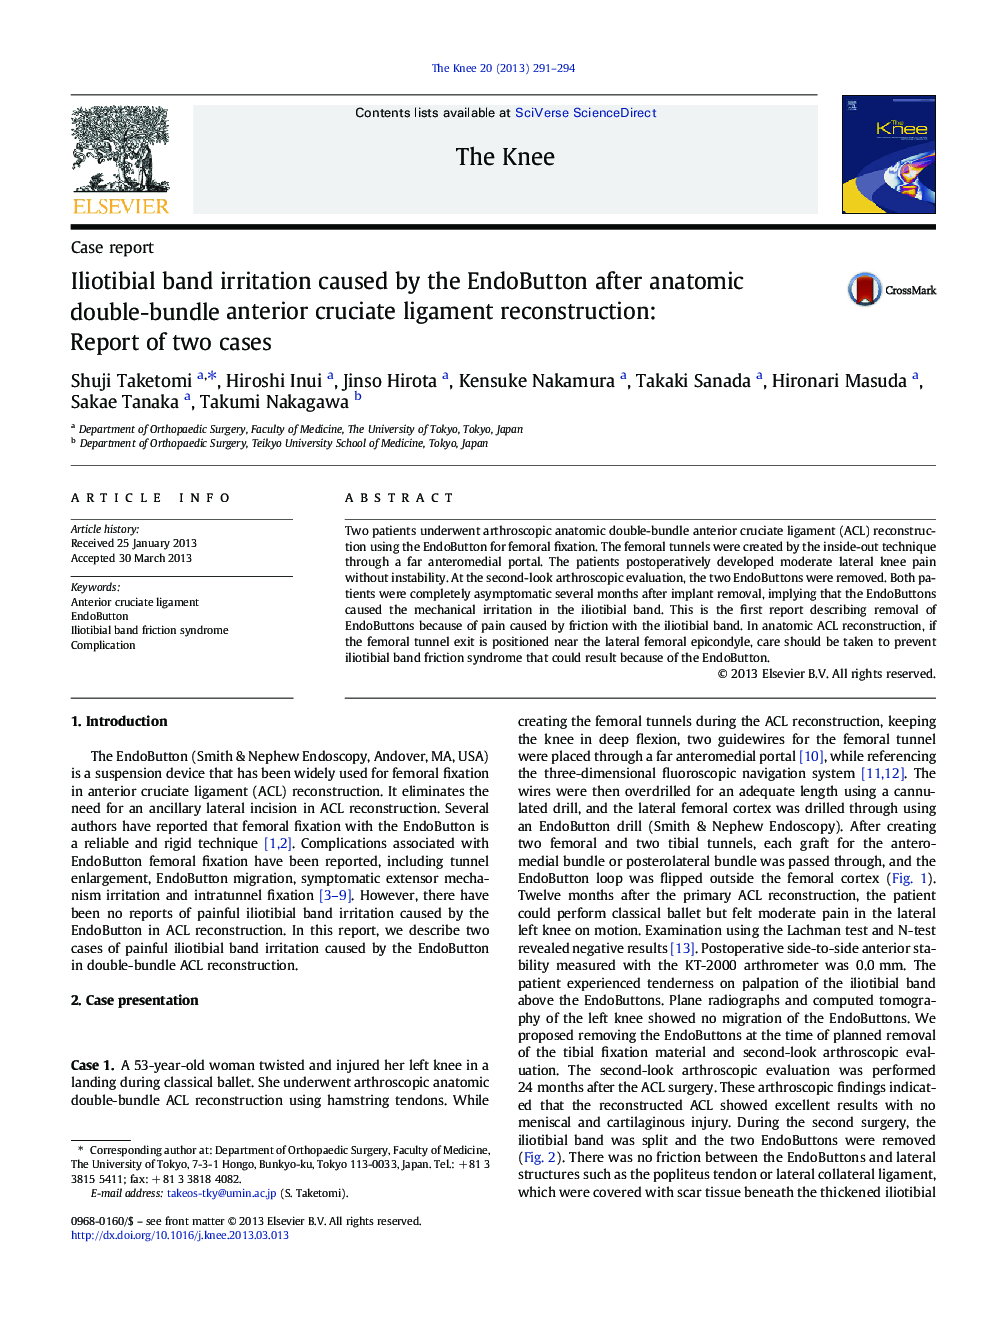 Iliotibial band irritation caused by the EndoButton after anatomic double-bundle anterior cruciate ligament reconstruction: Report of two cases